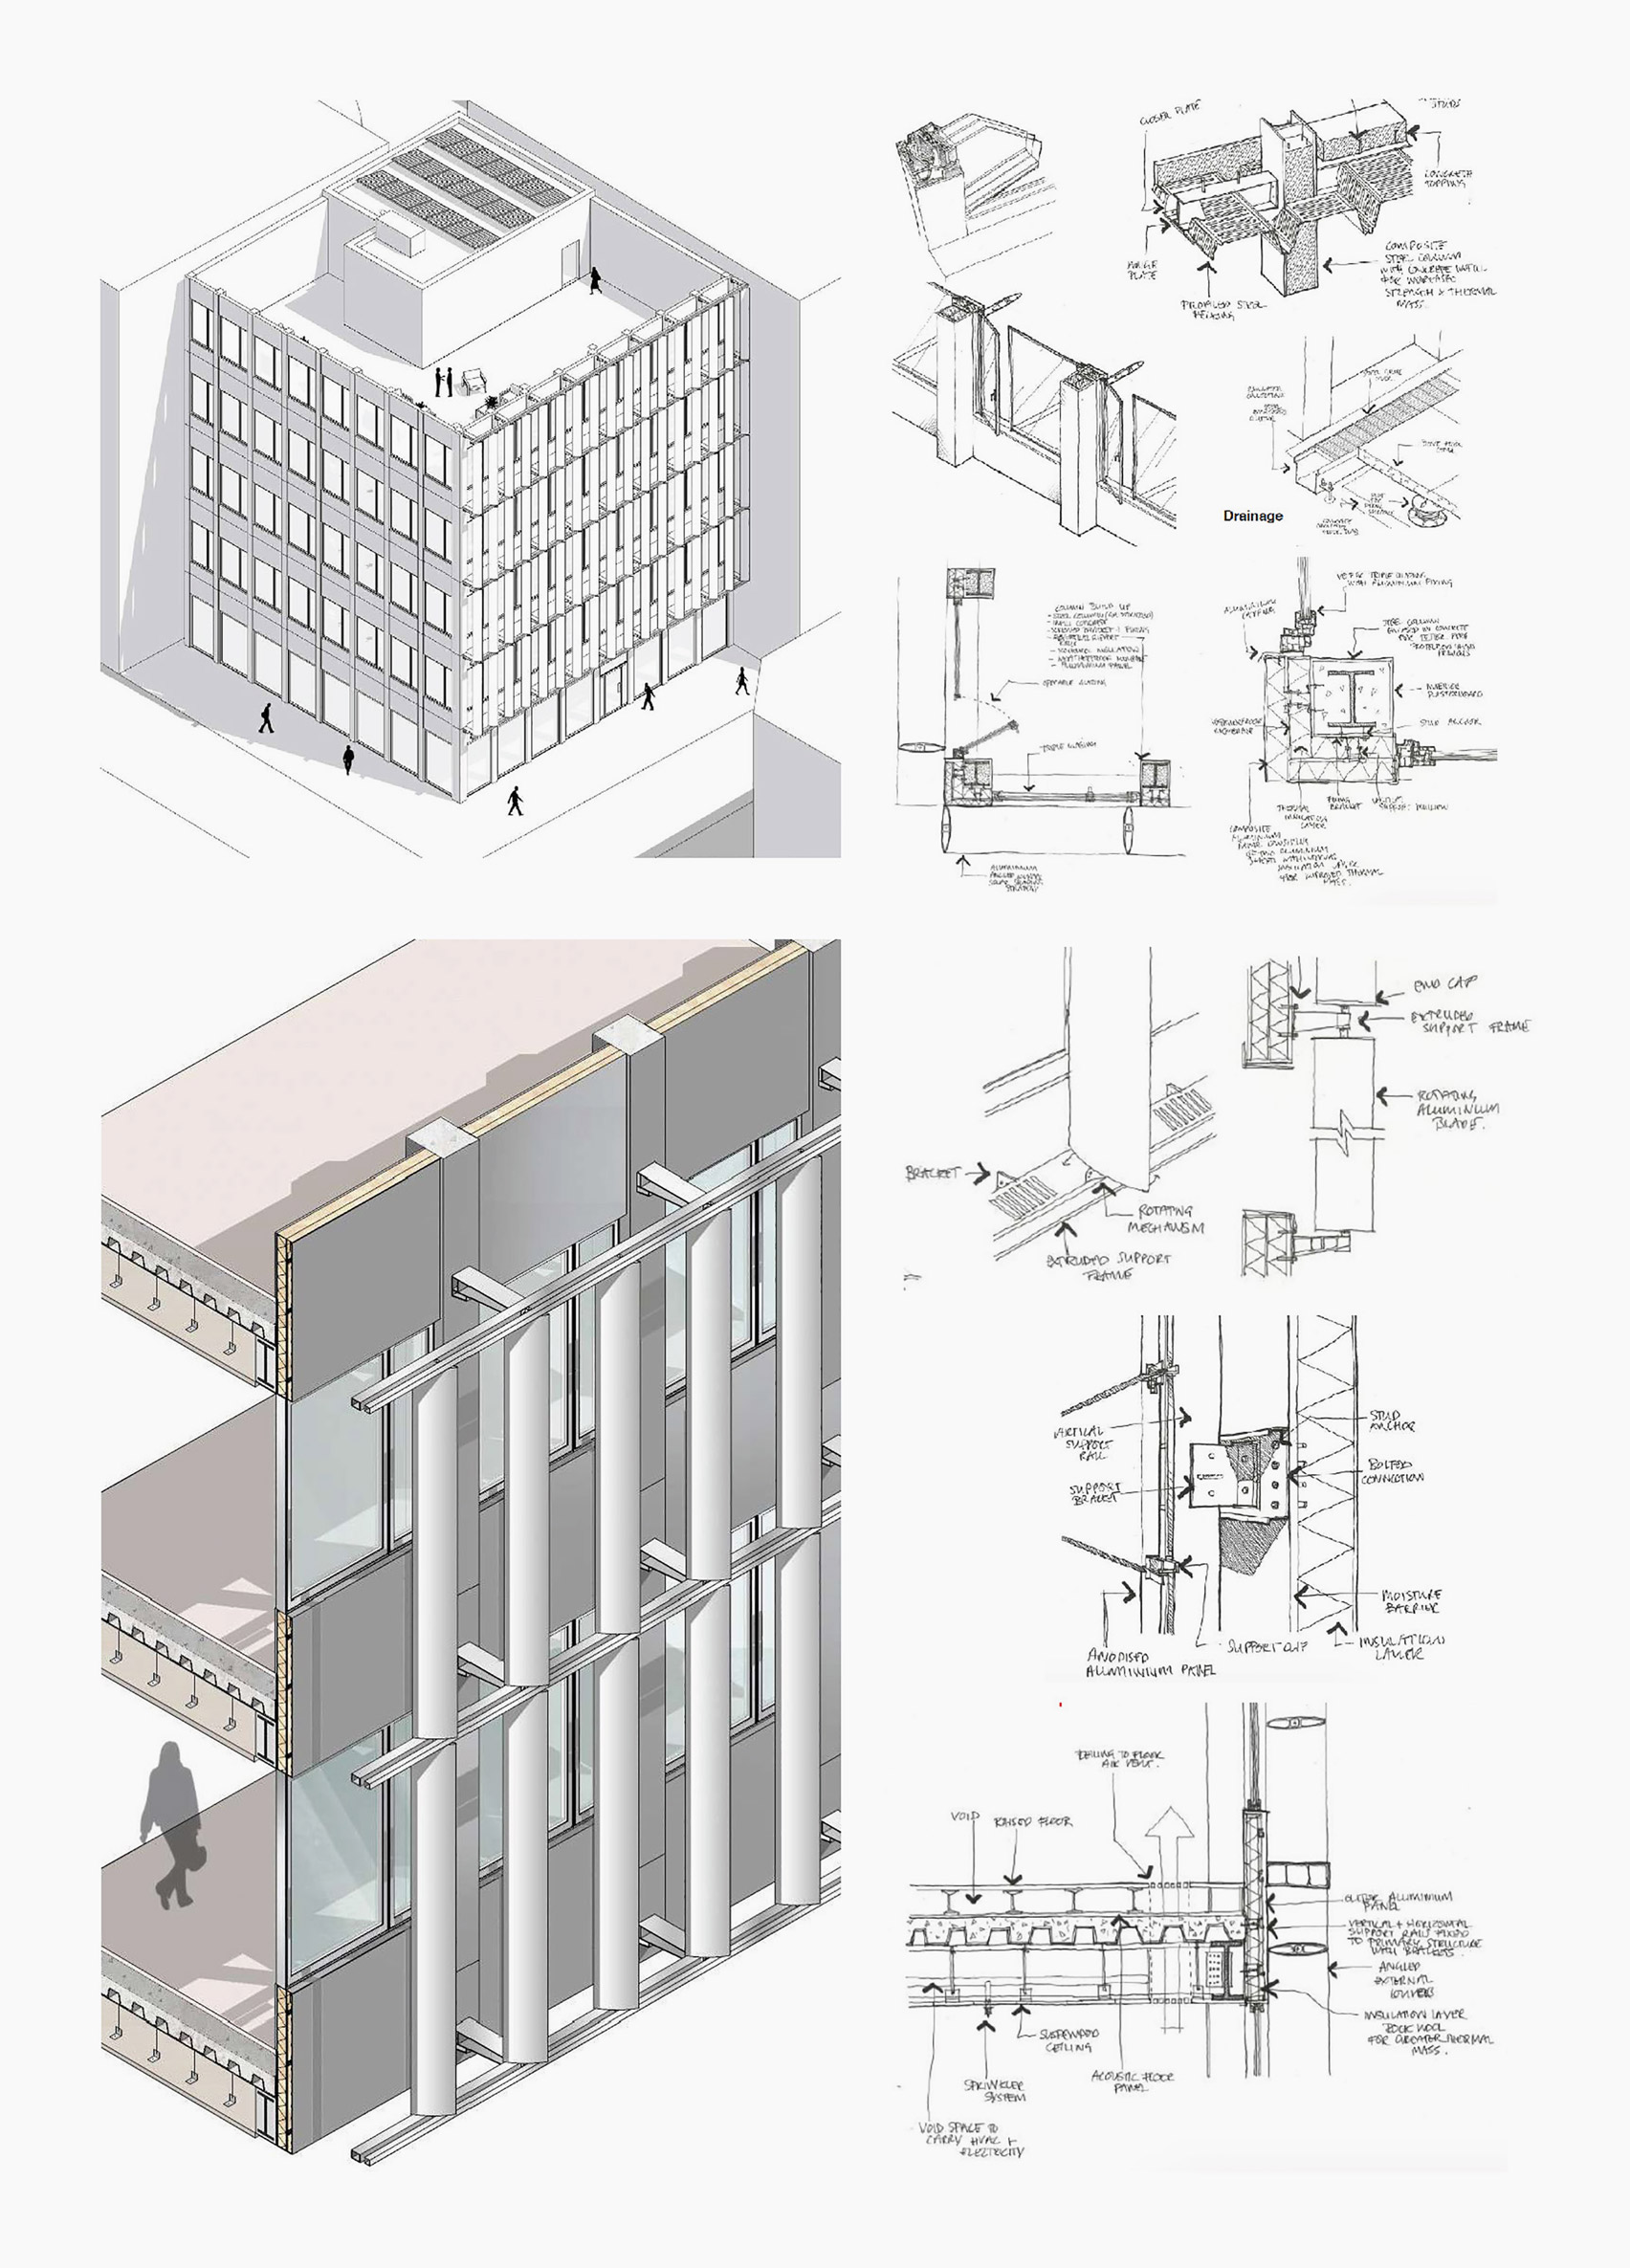 Manchester School of Architecture: Technologies